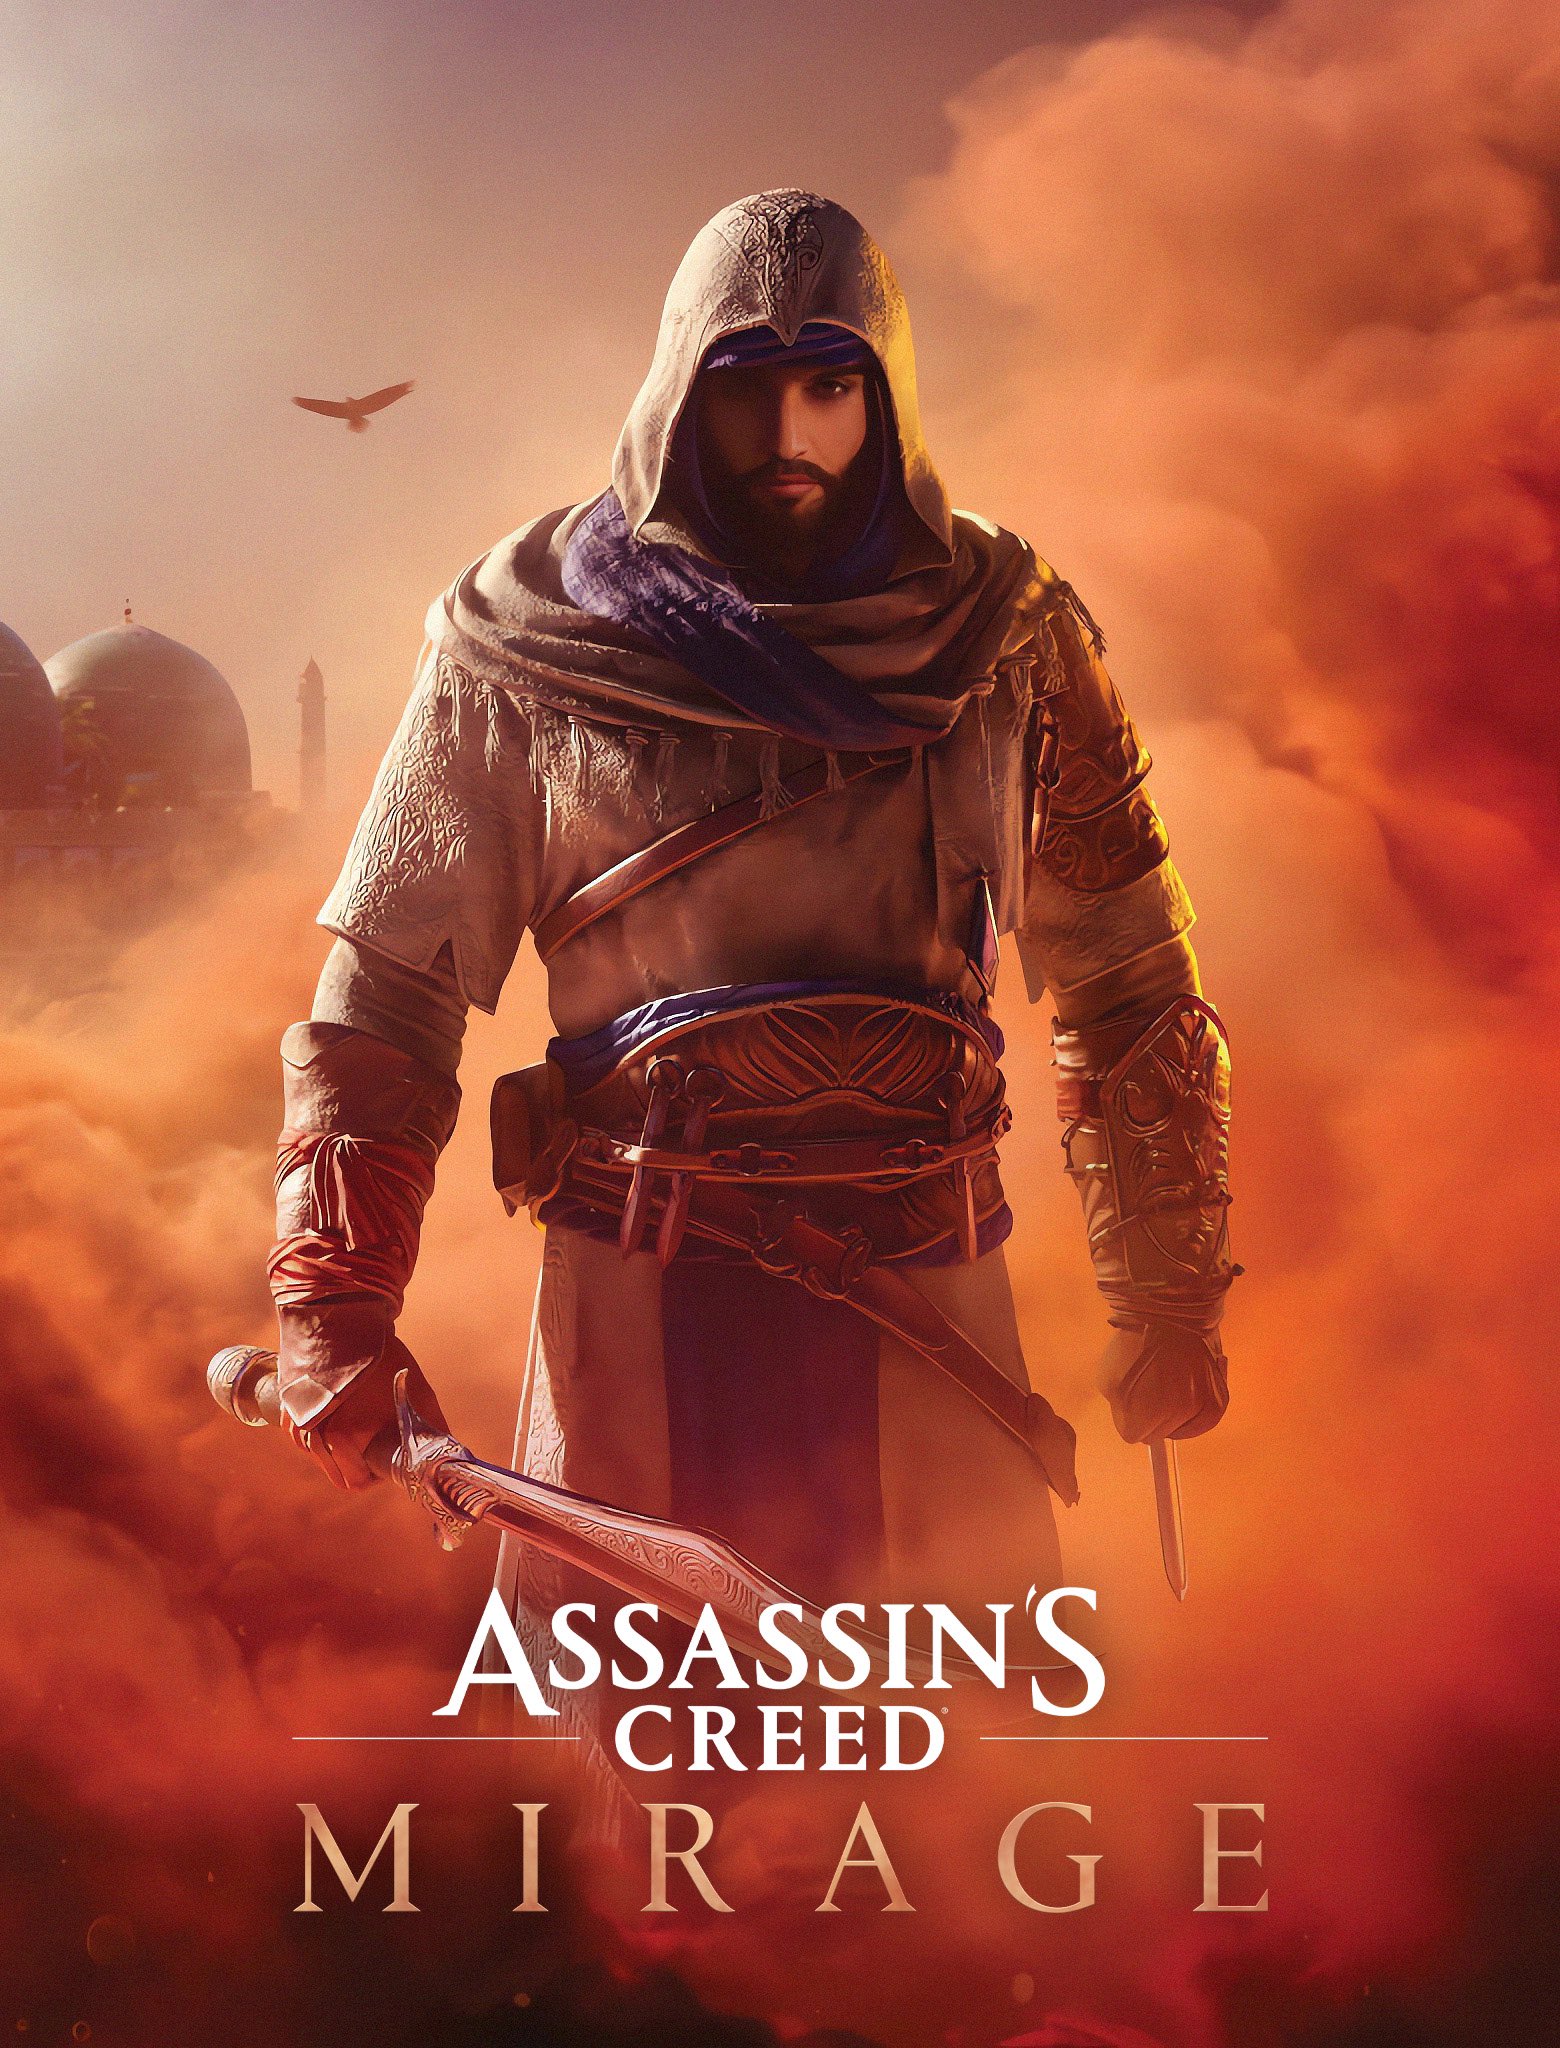 Highest rated Assassin's Creed games according to Metacritic